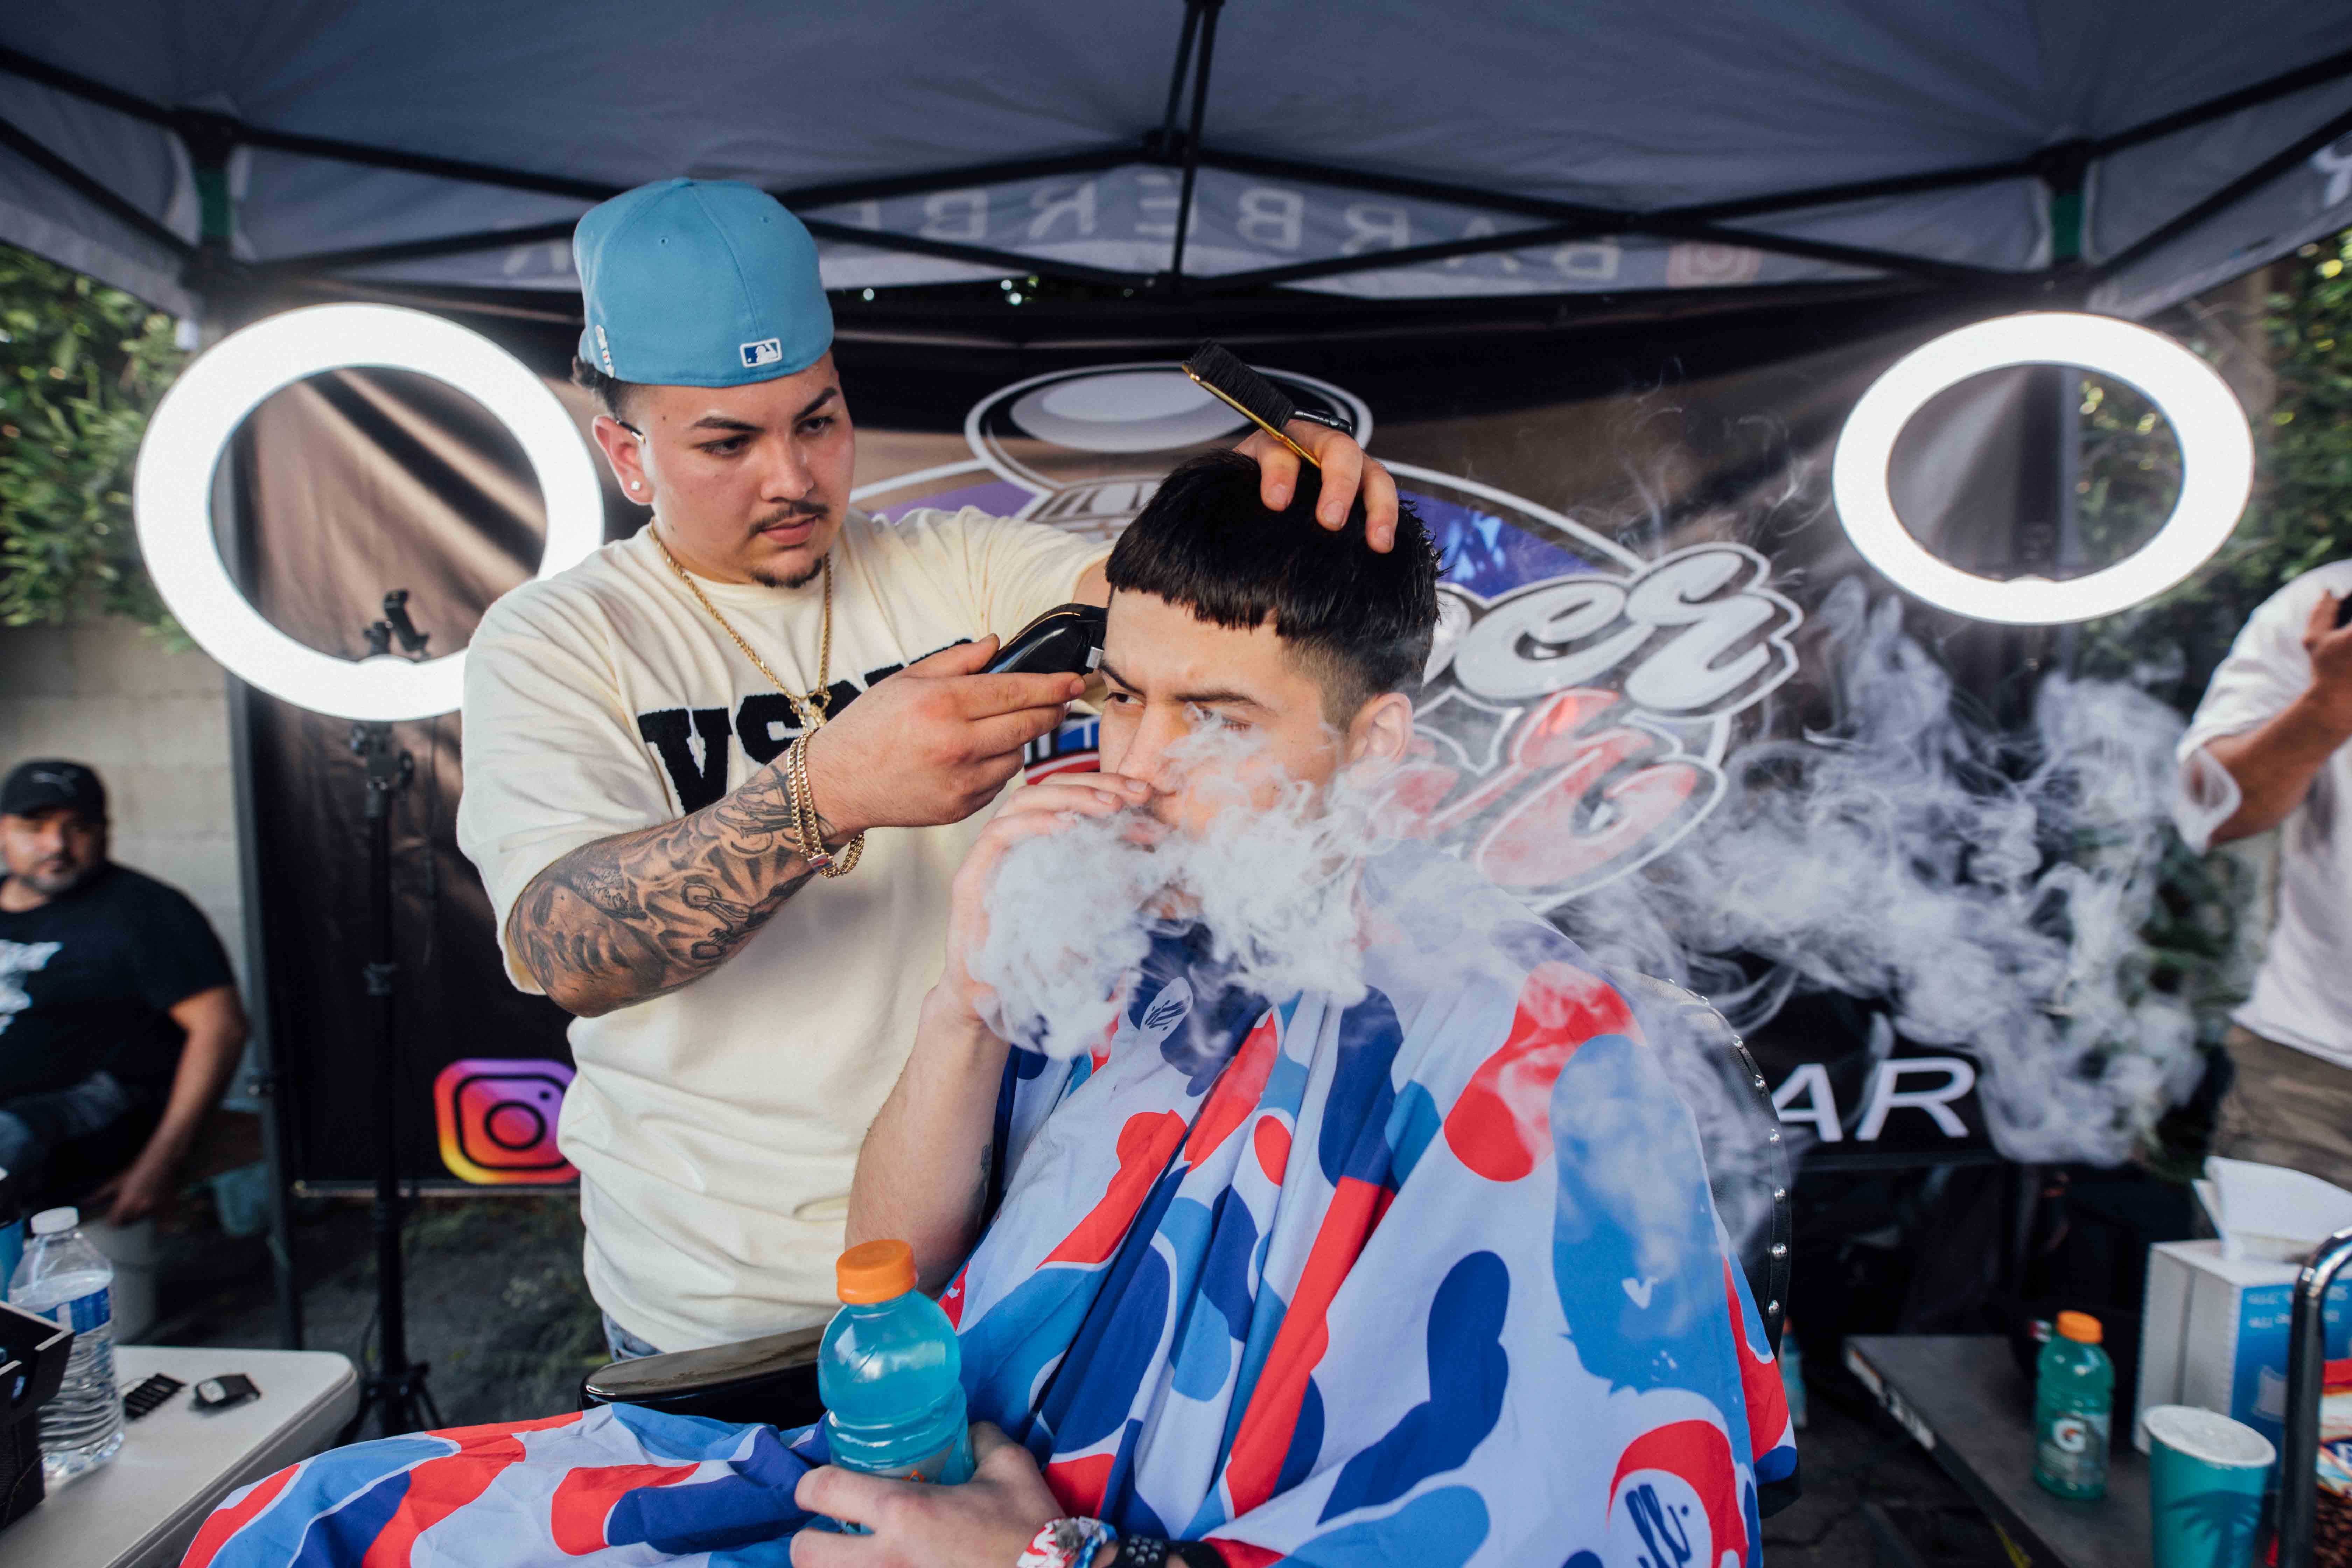 There was onsite barbering for spectators.